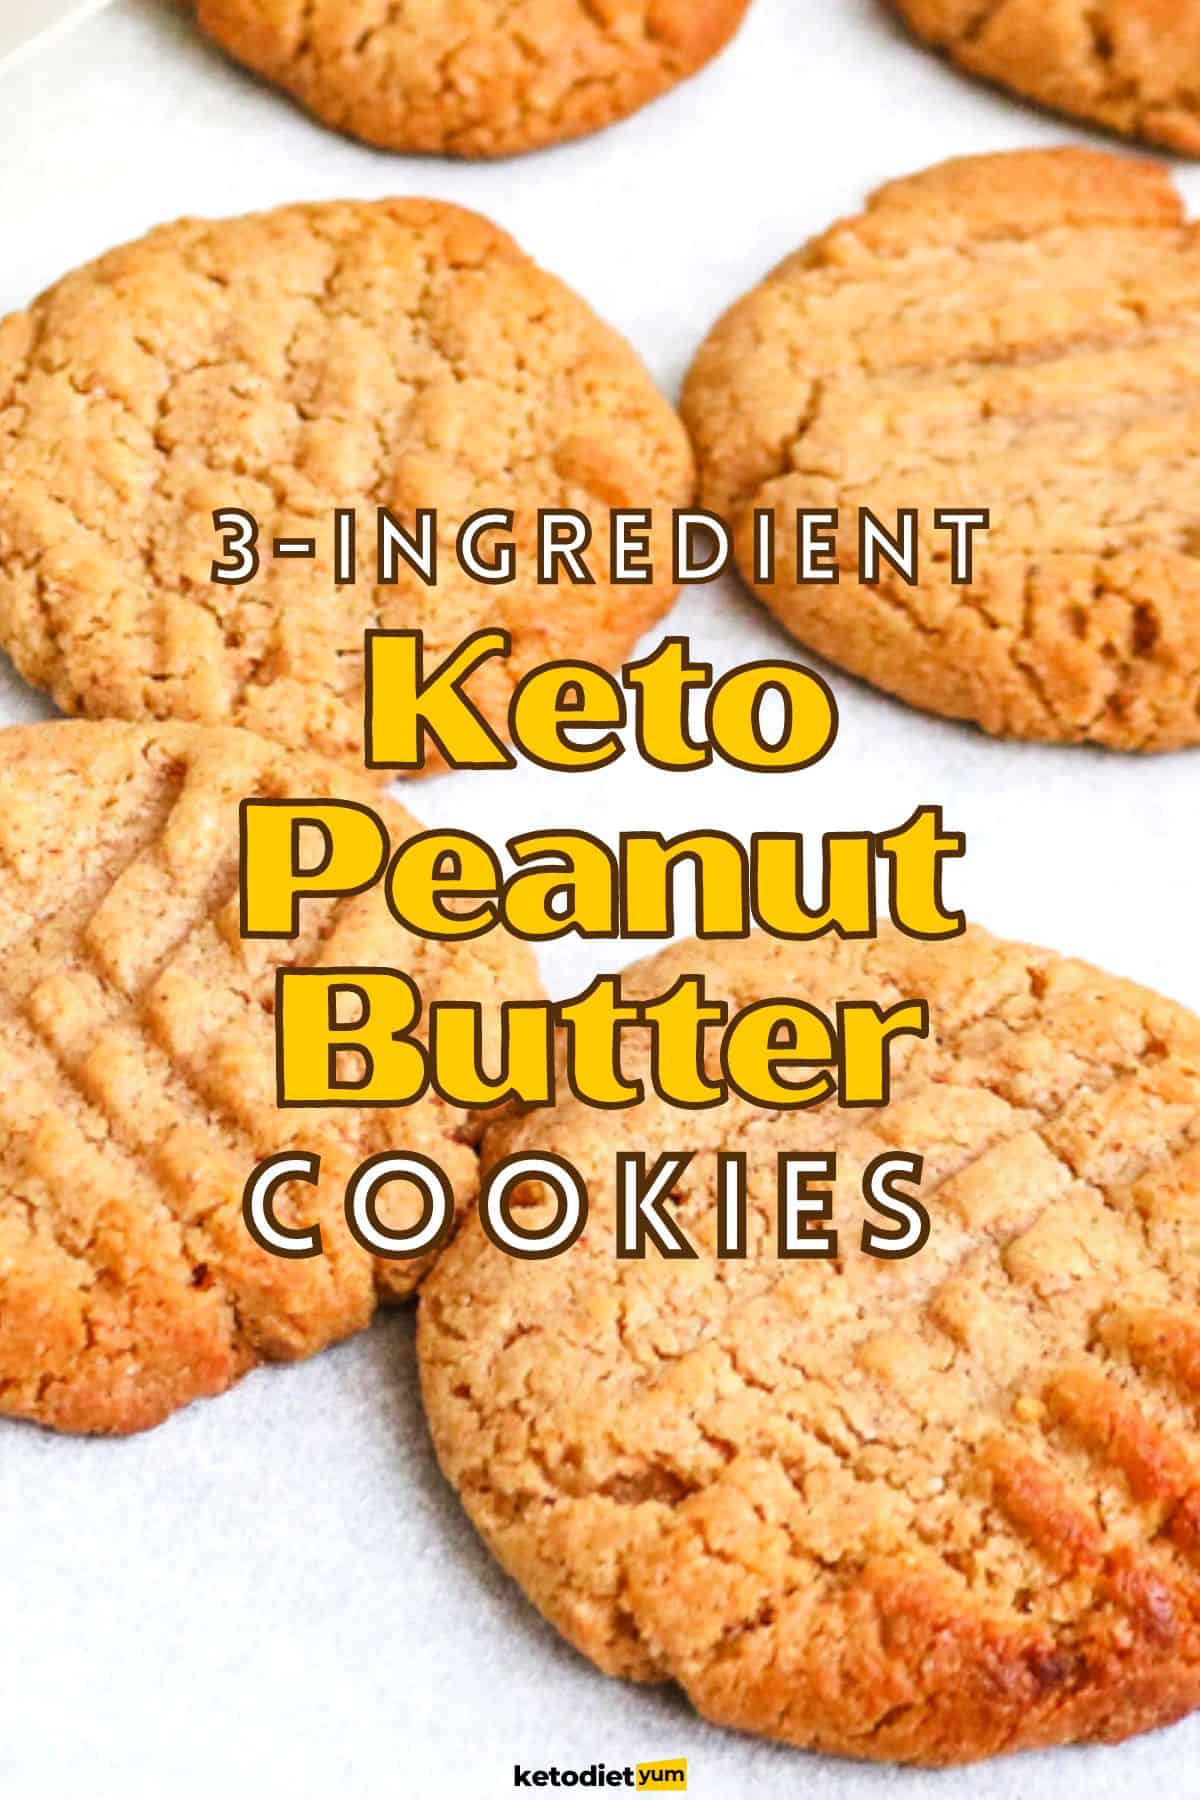 Keto Peanut Butter Cookies - Easy with 3 Ingredients